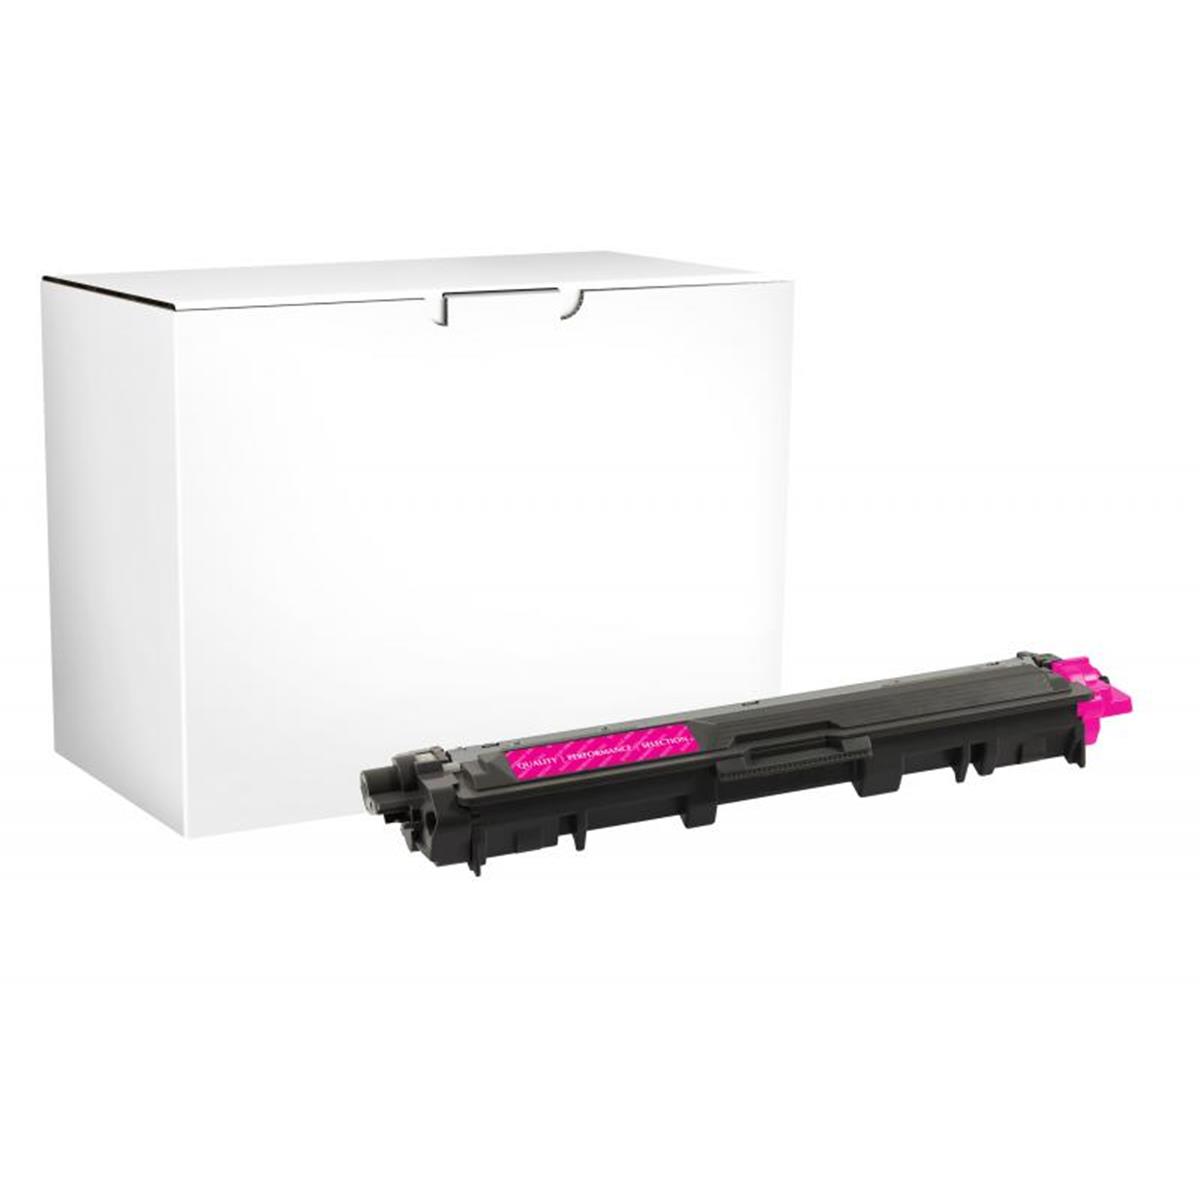 Picture of Brother 200730 Magenta Toner Cartridge for TN221